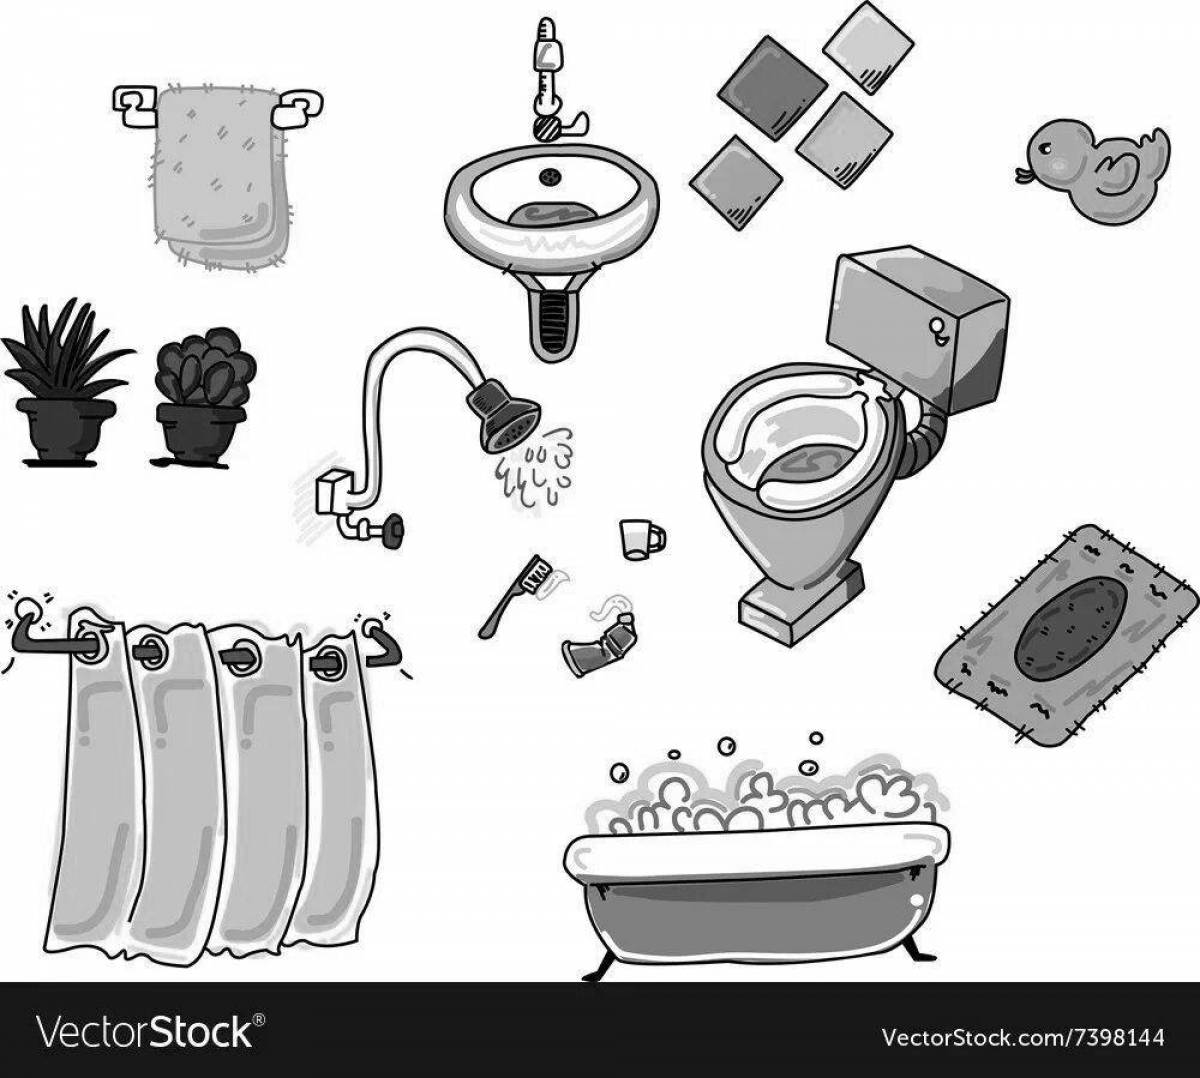 Coloring page fashion accessories for the bathroom